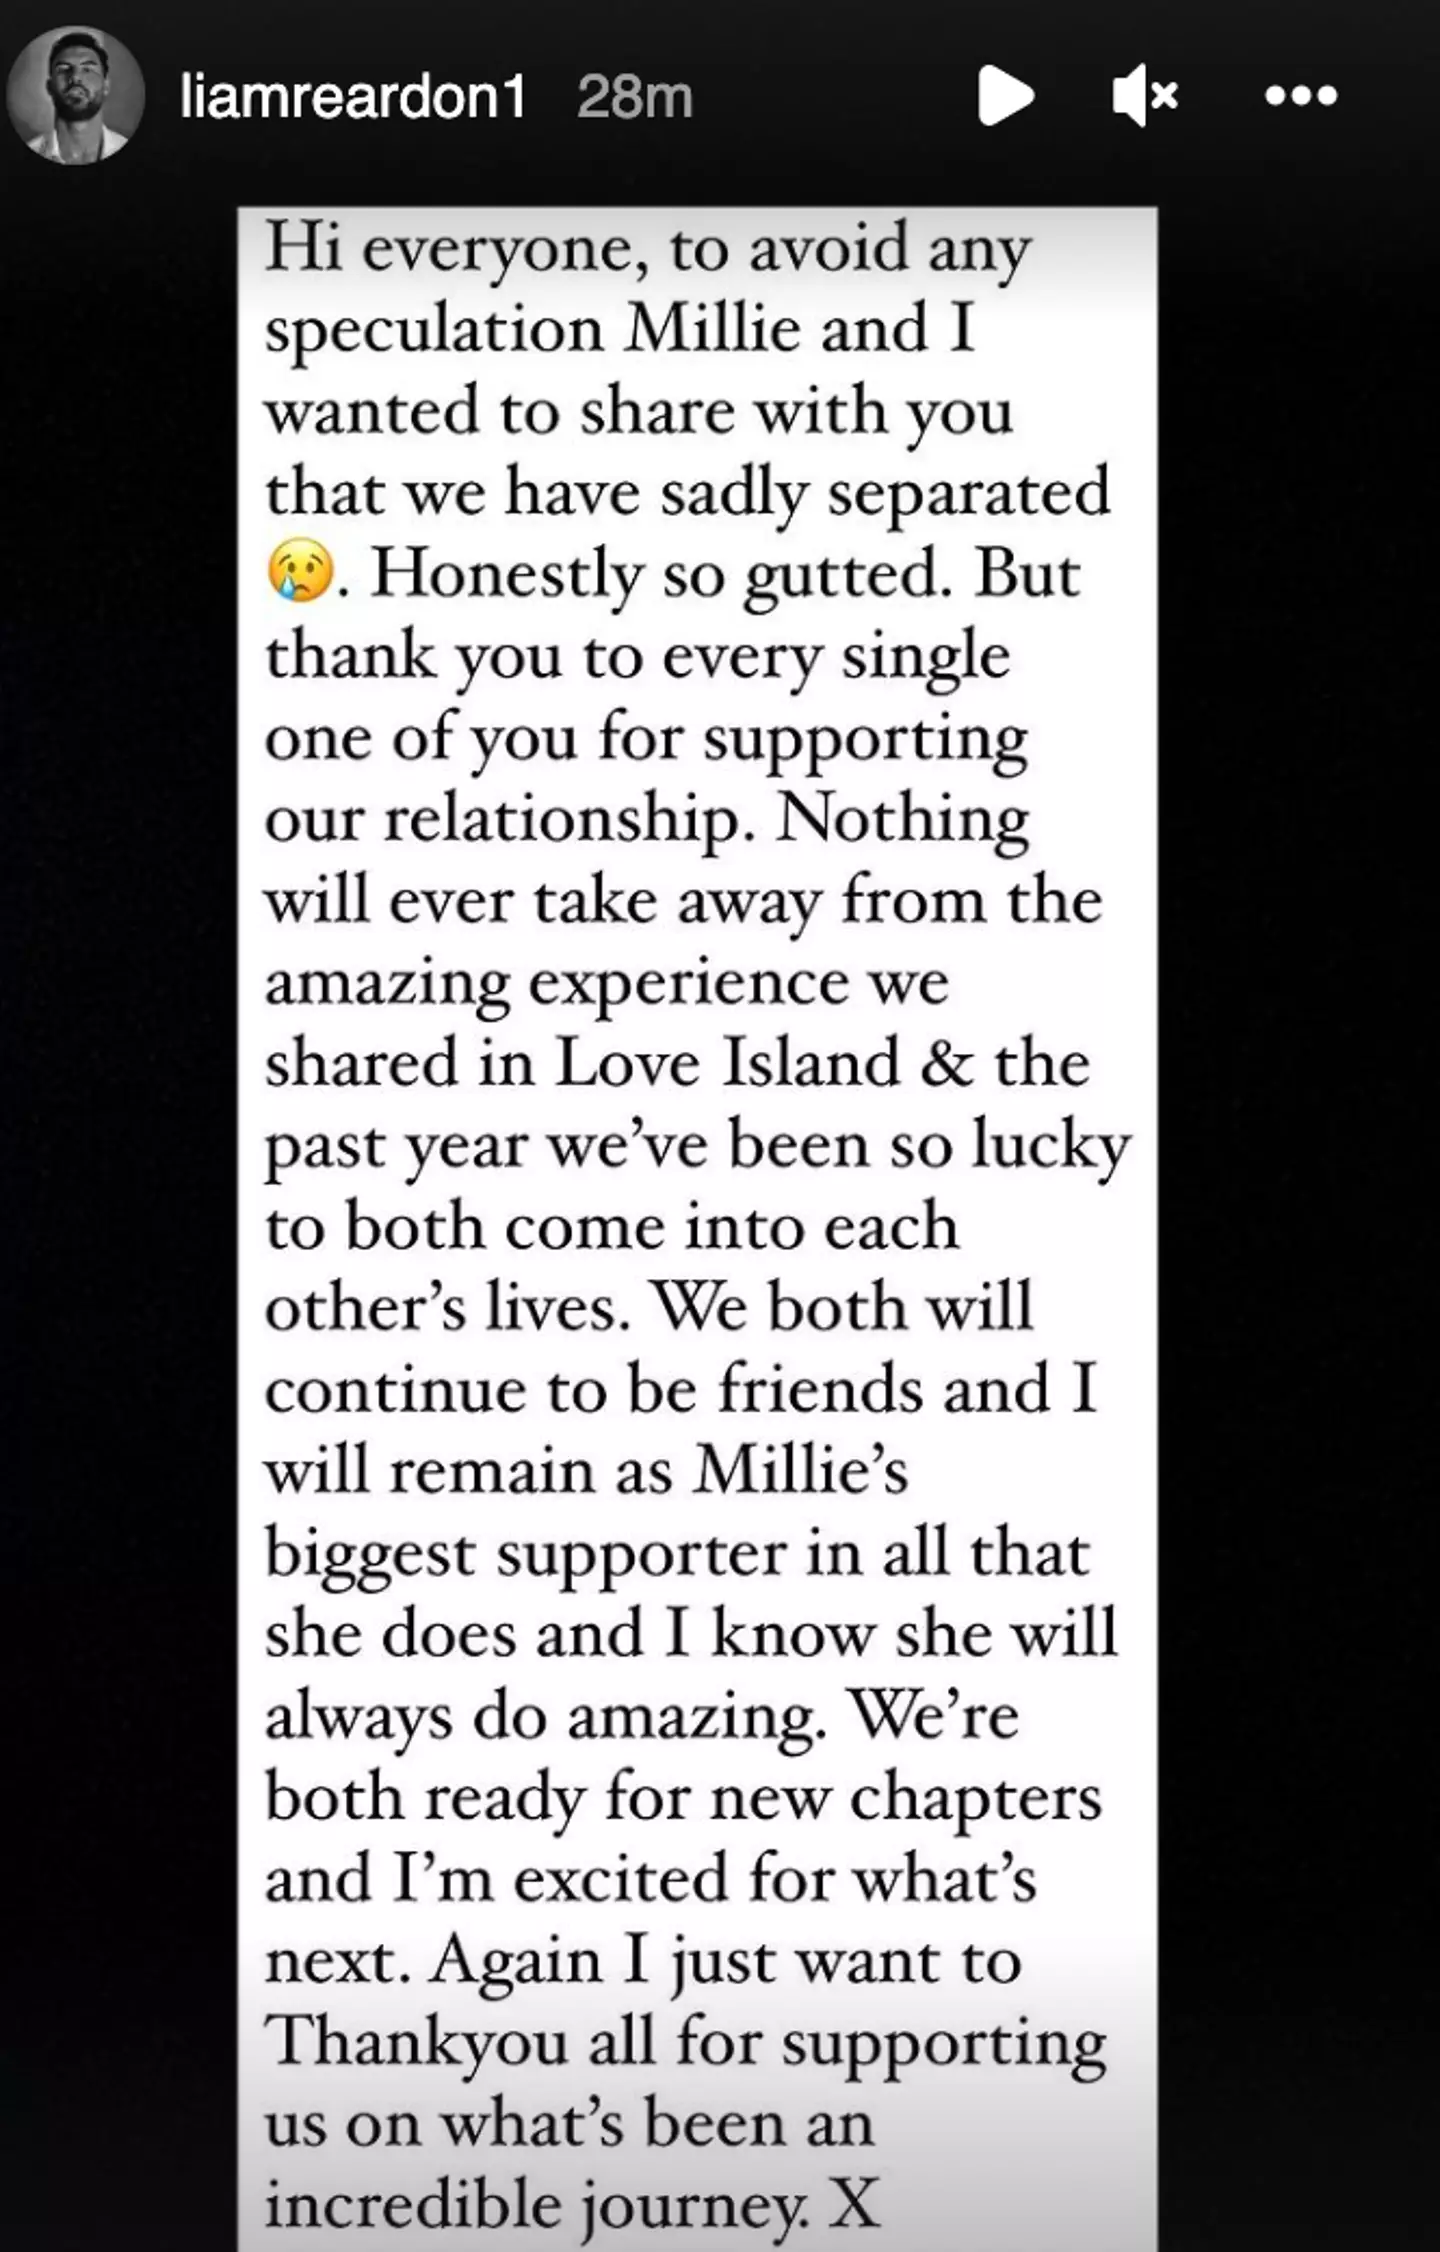 Liam released a statement on Instagram.